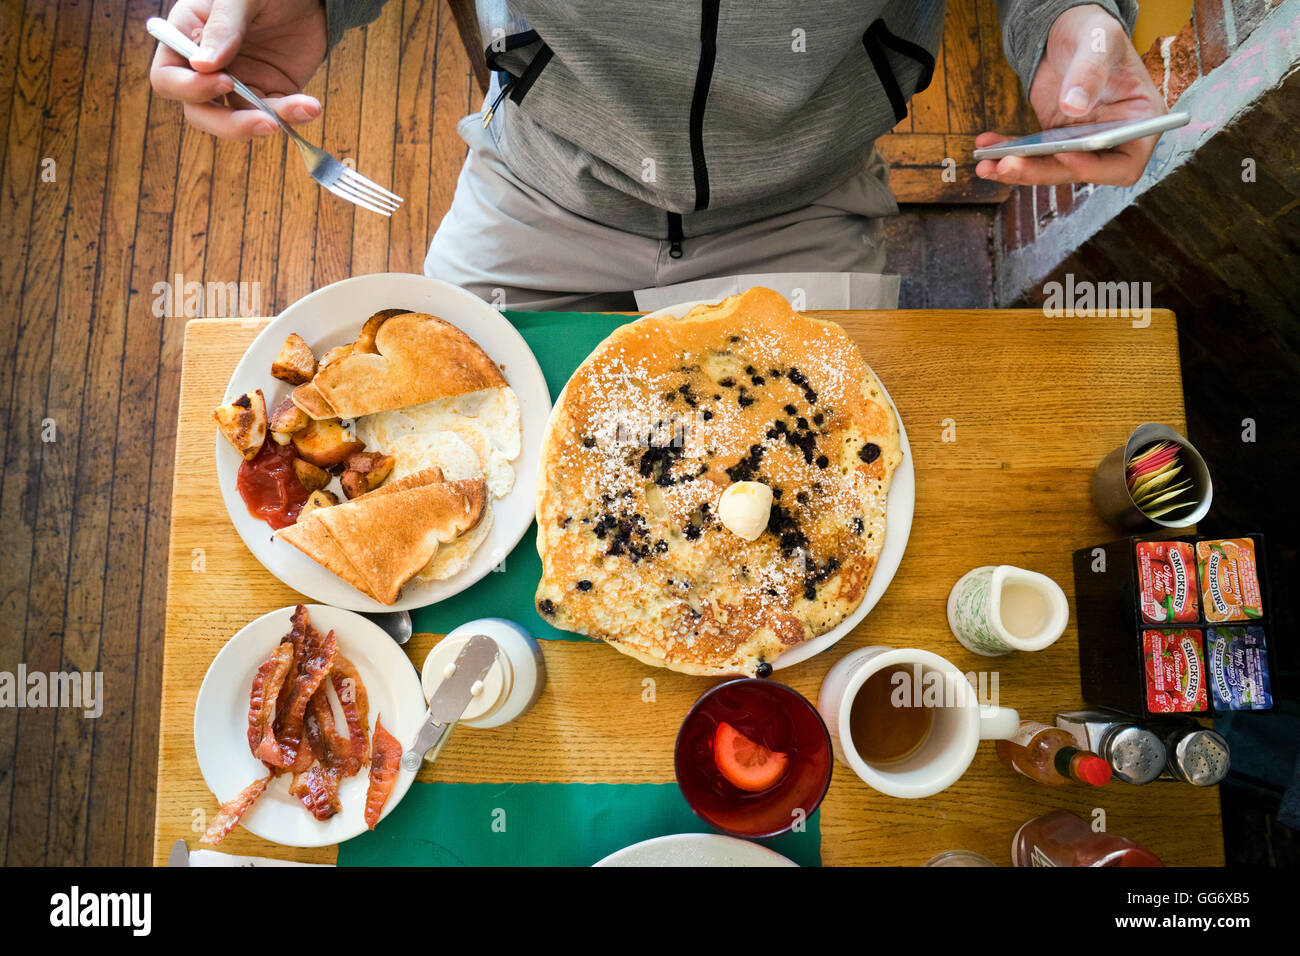 Man sitting in front of breakfast food, using smartphone Stock Photo